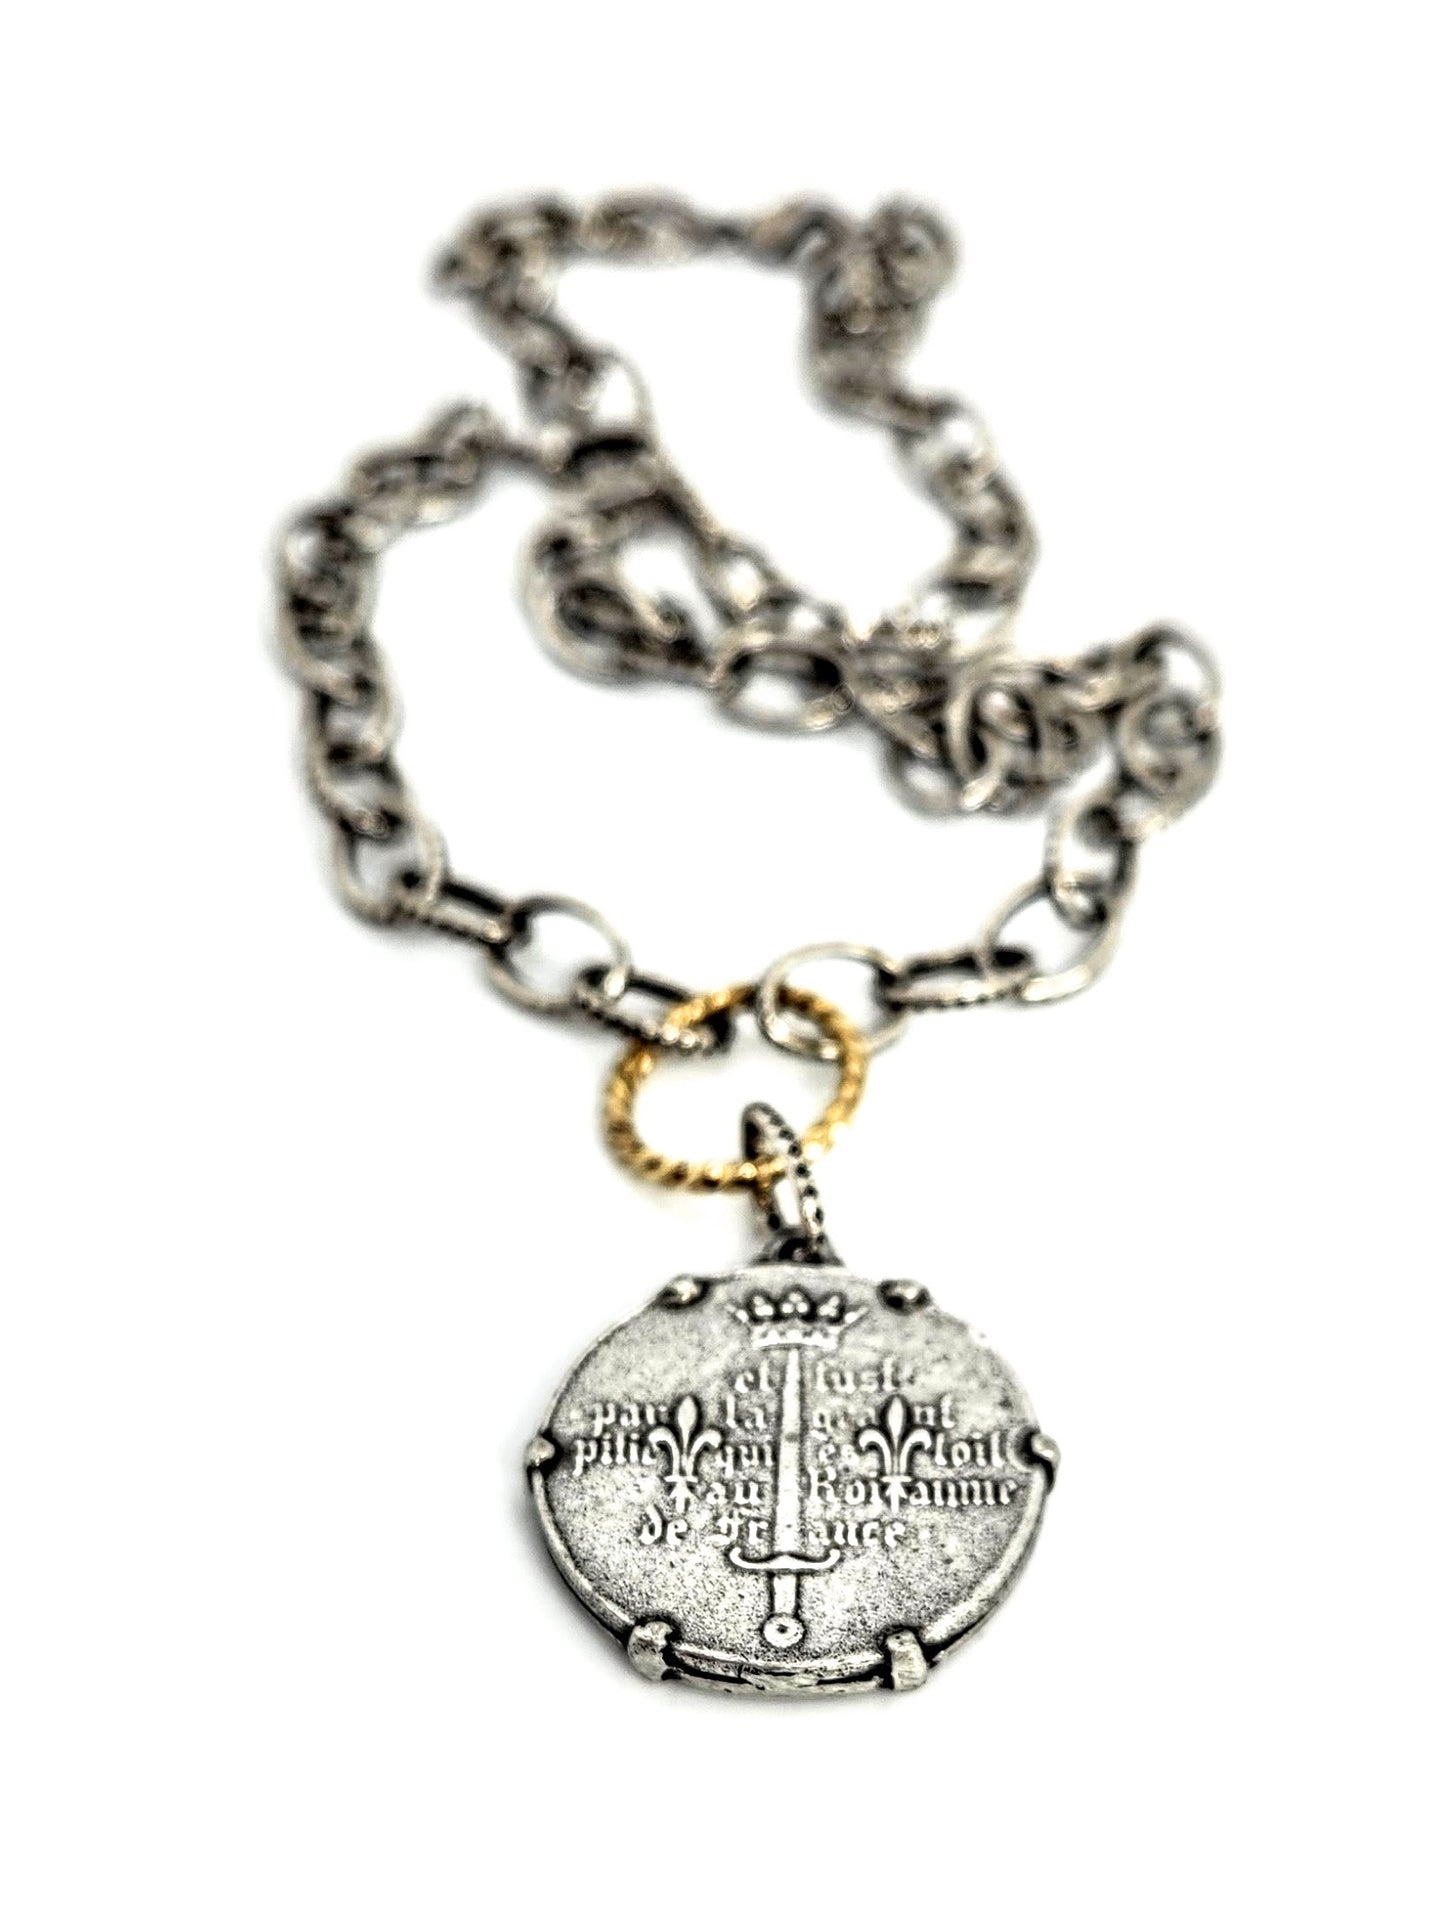 Joan of Arc Necklace